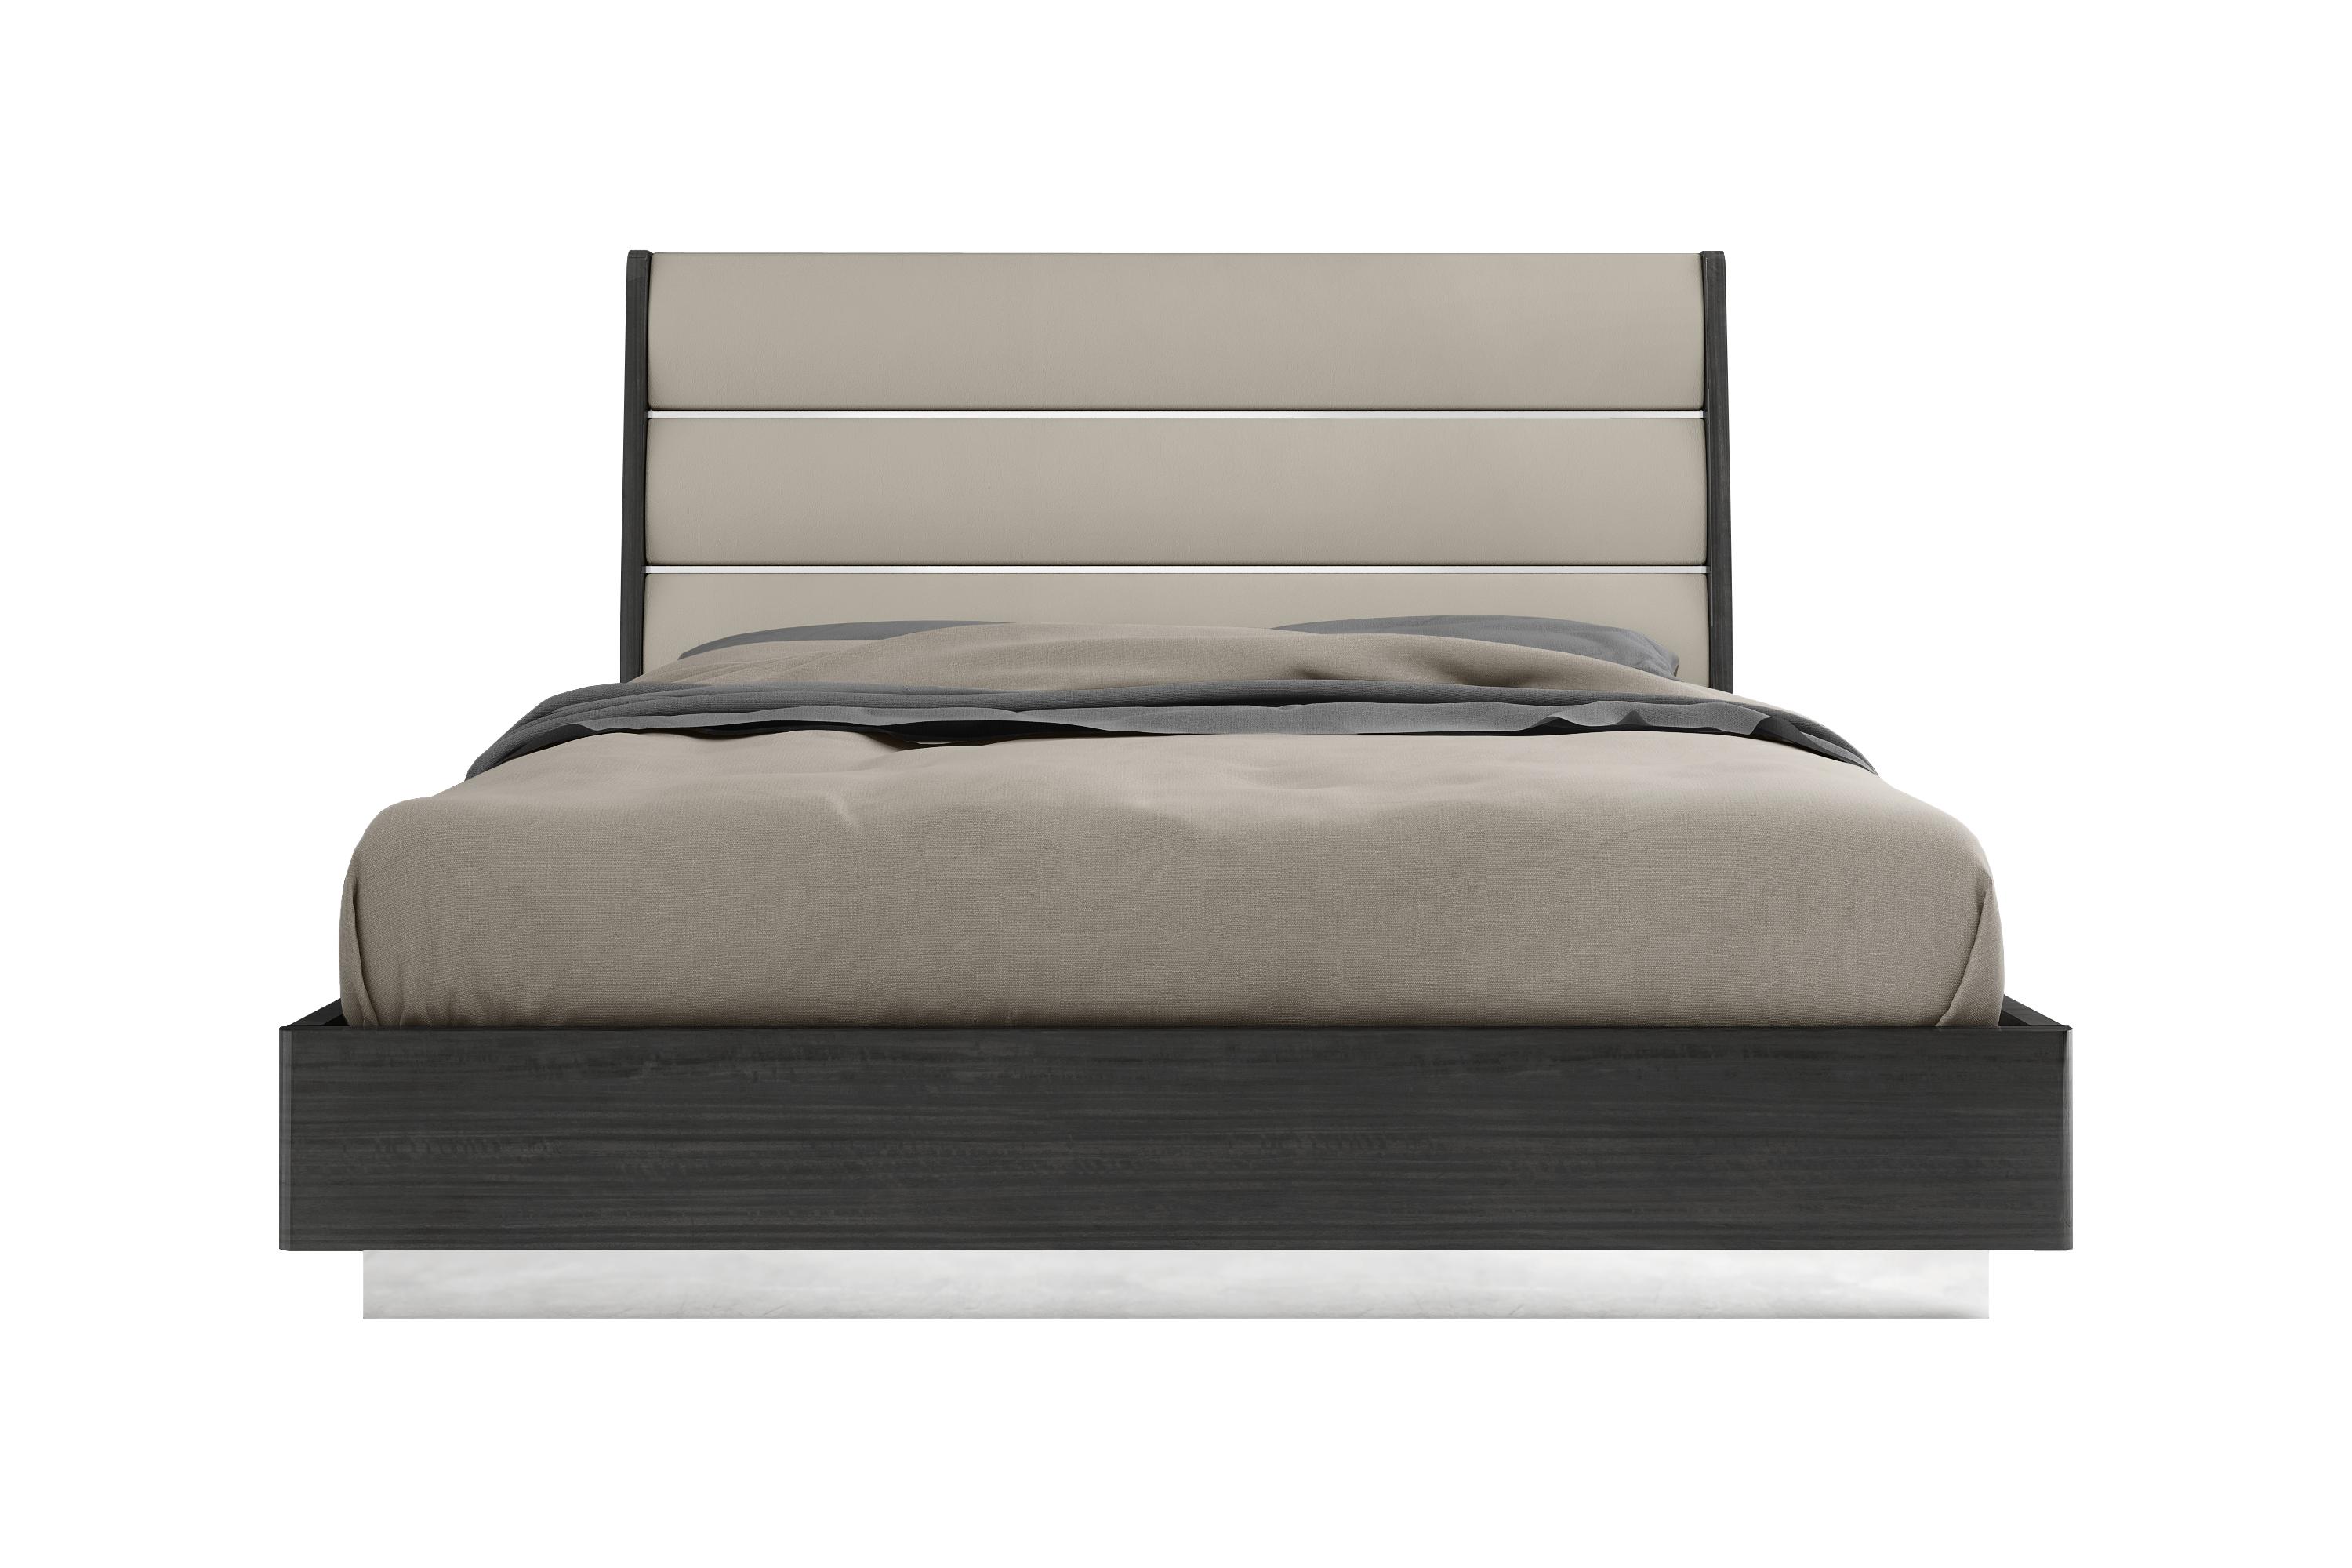 

    
Contemporary High Gloss Dark Gray Faux Leather King Bed WhiteLine BK1752-DGRY/LGRY Pino
